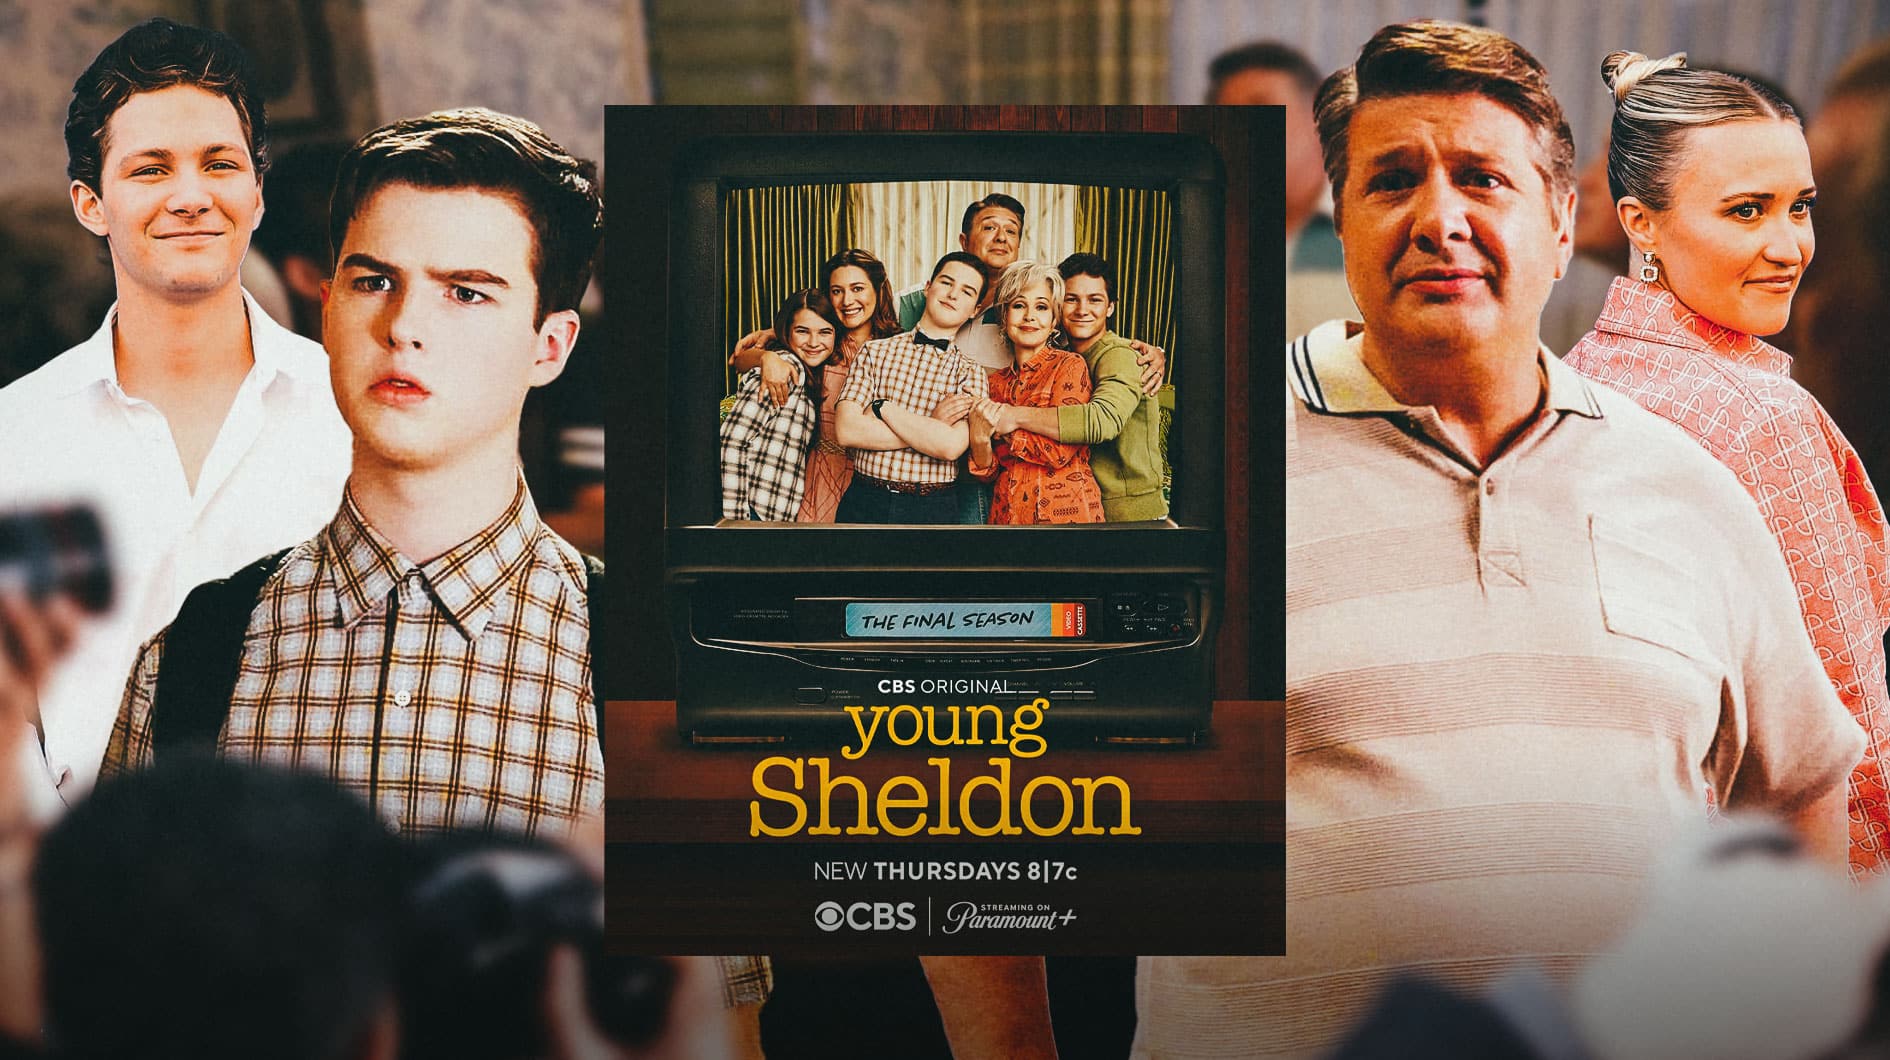 Young Sheldon Season 7 poster with Montana Jordan, Iain Armitage as Sheldon, Lance Barber as George Cooper, and Emily Osment with family dinner table background.